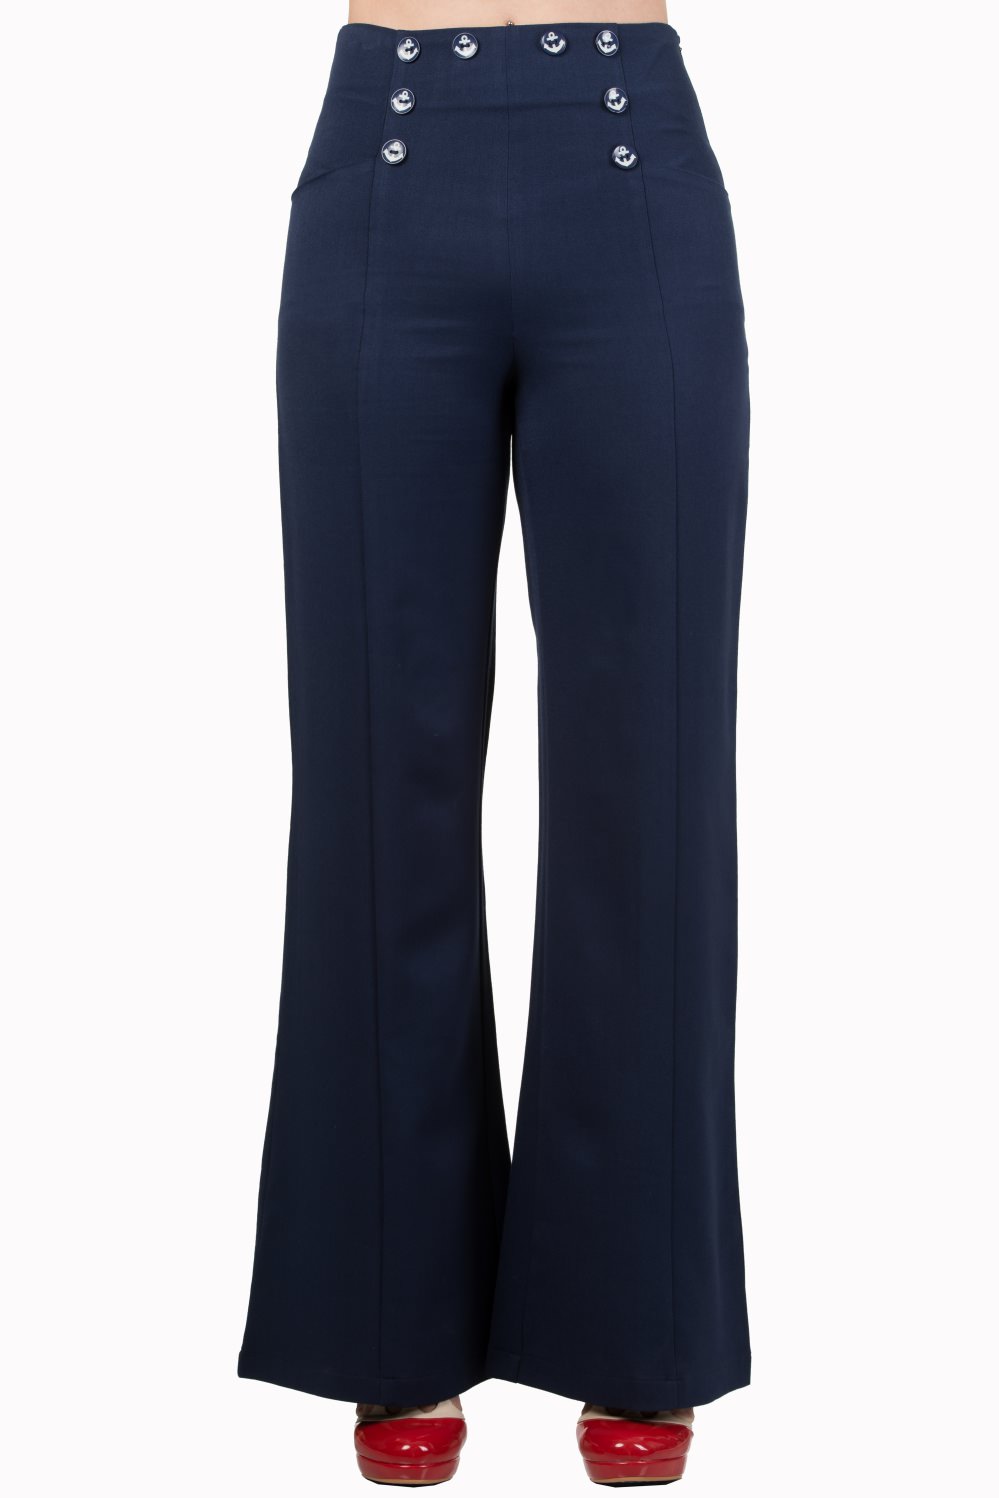 Banned TR4051 Stay Awhile Trousers Navy - Nichole Jade Rockabilly Boutique